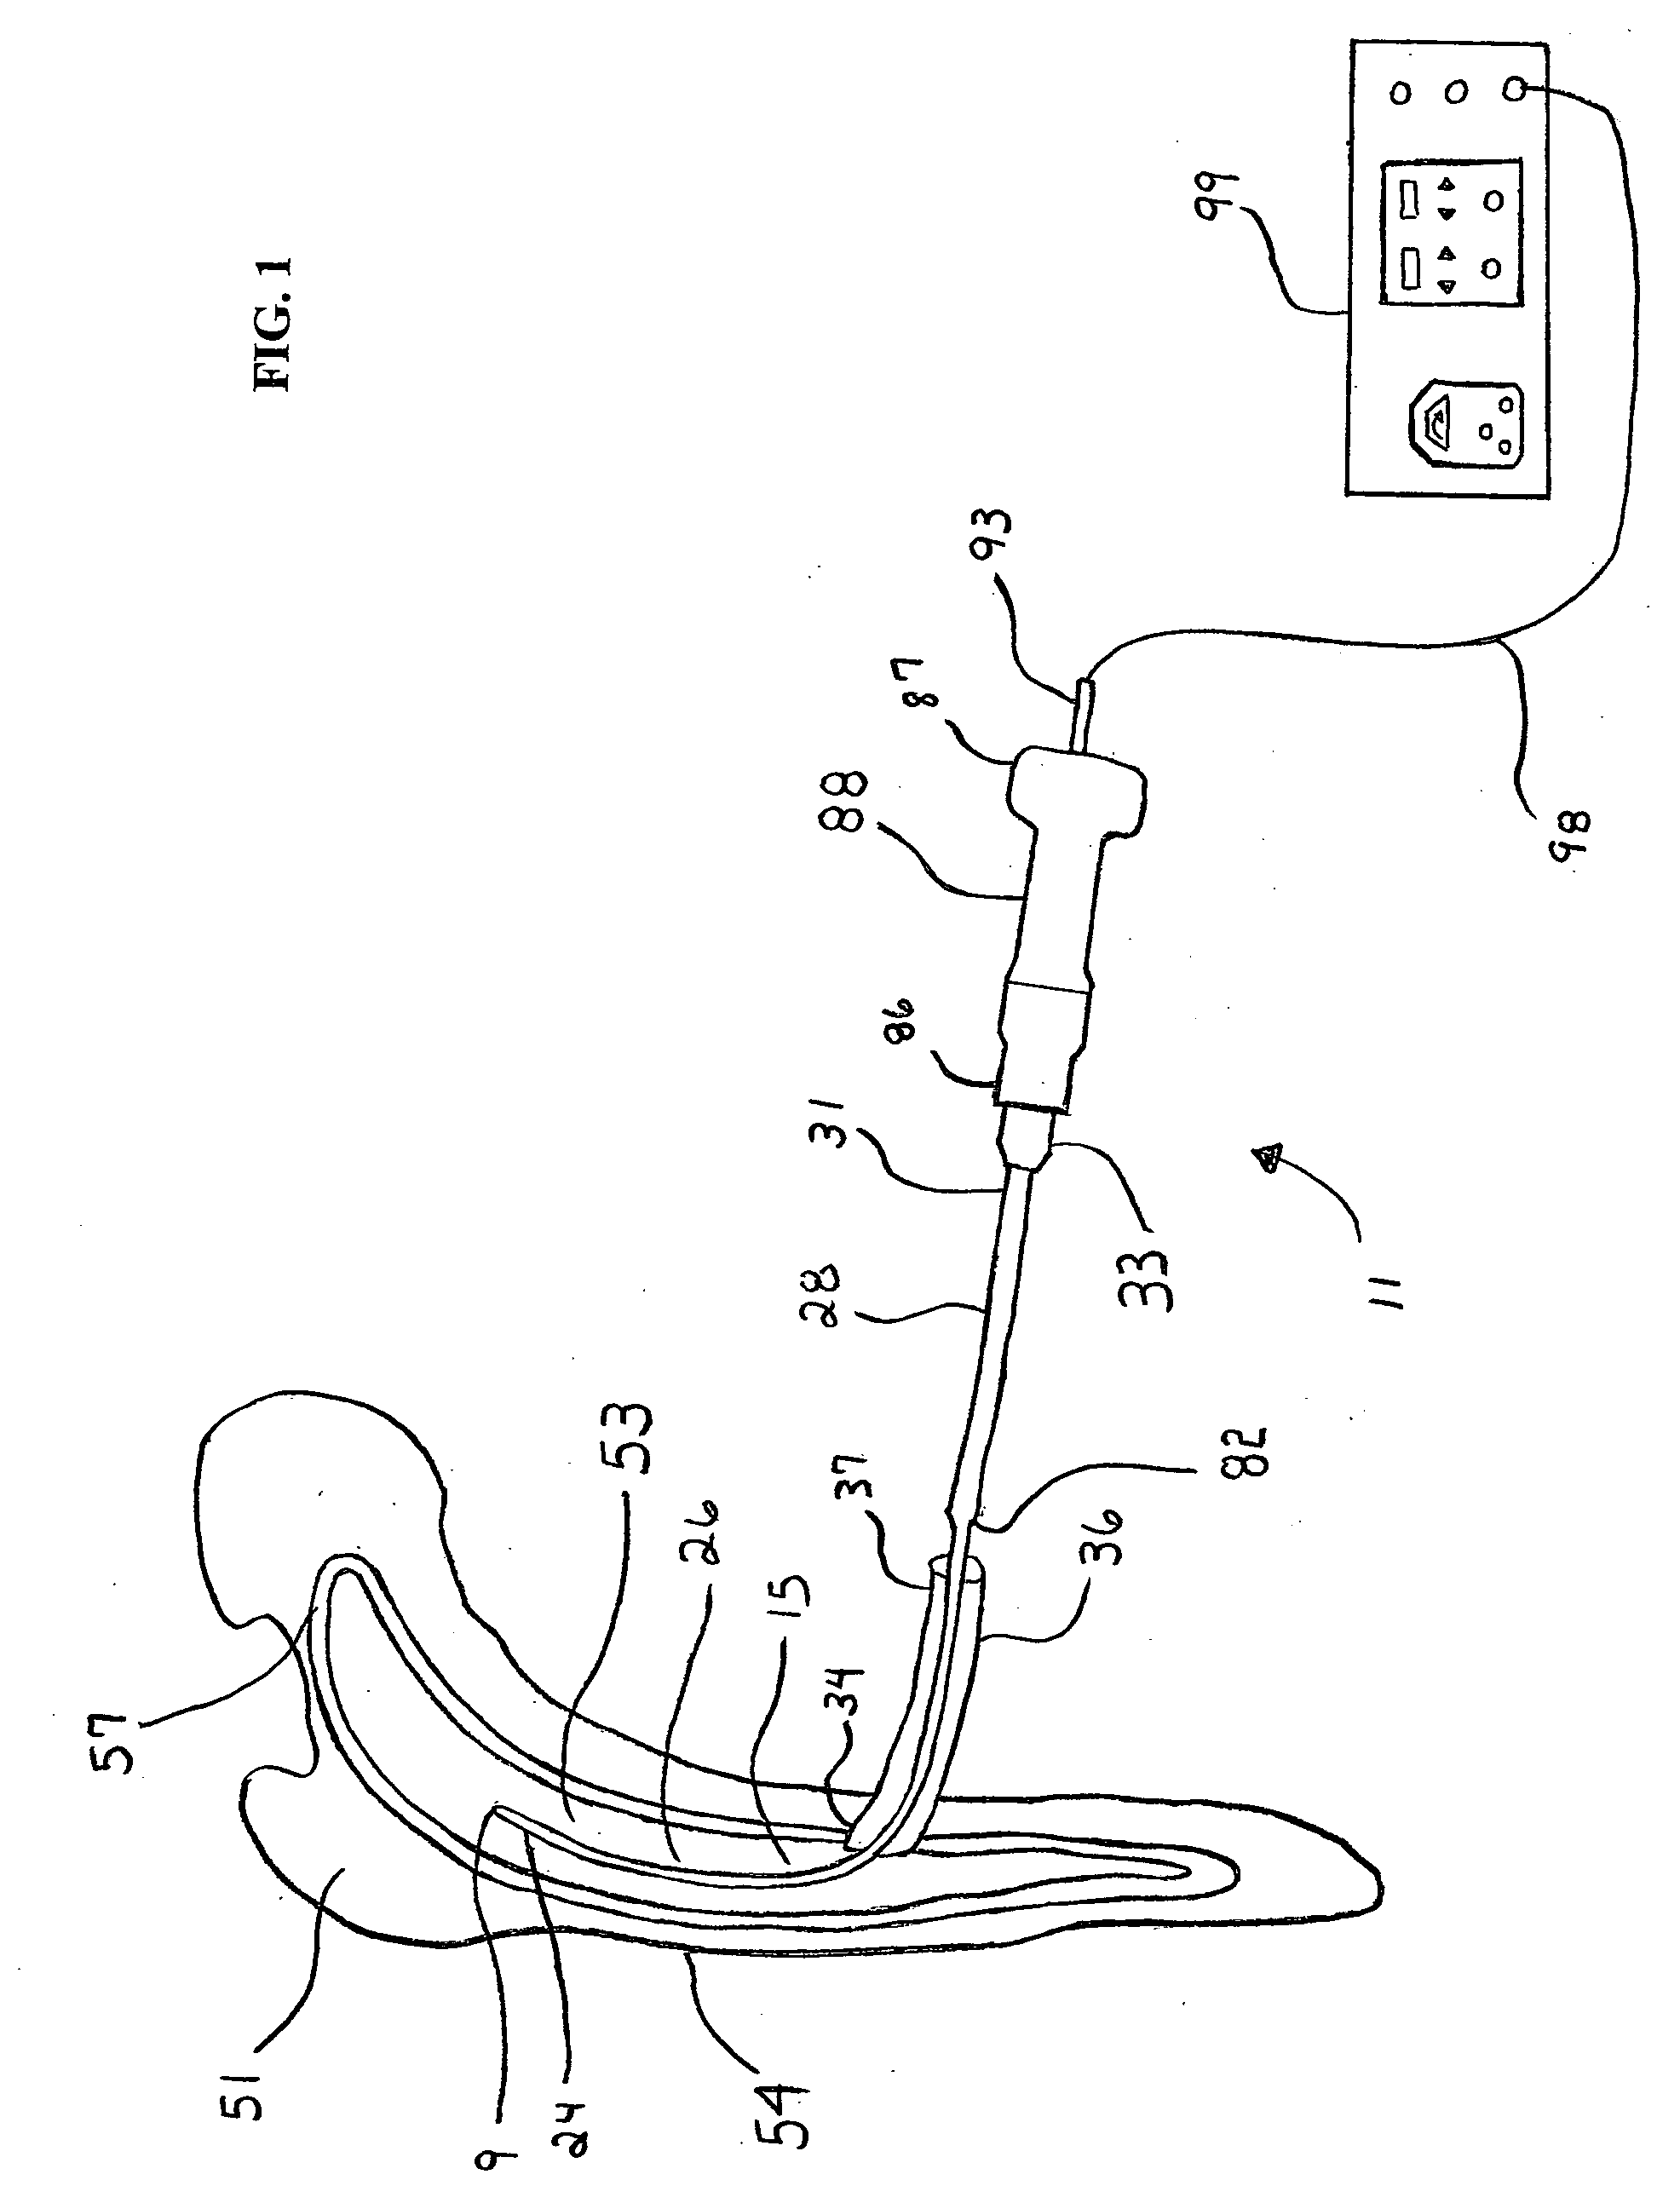 Apparatus and method for using an ultrasonic medical device to reinforce bone